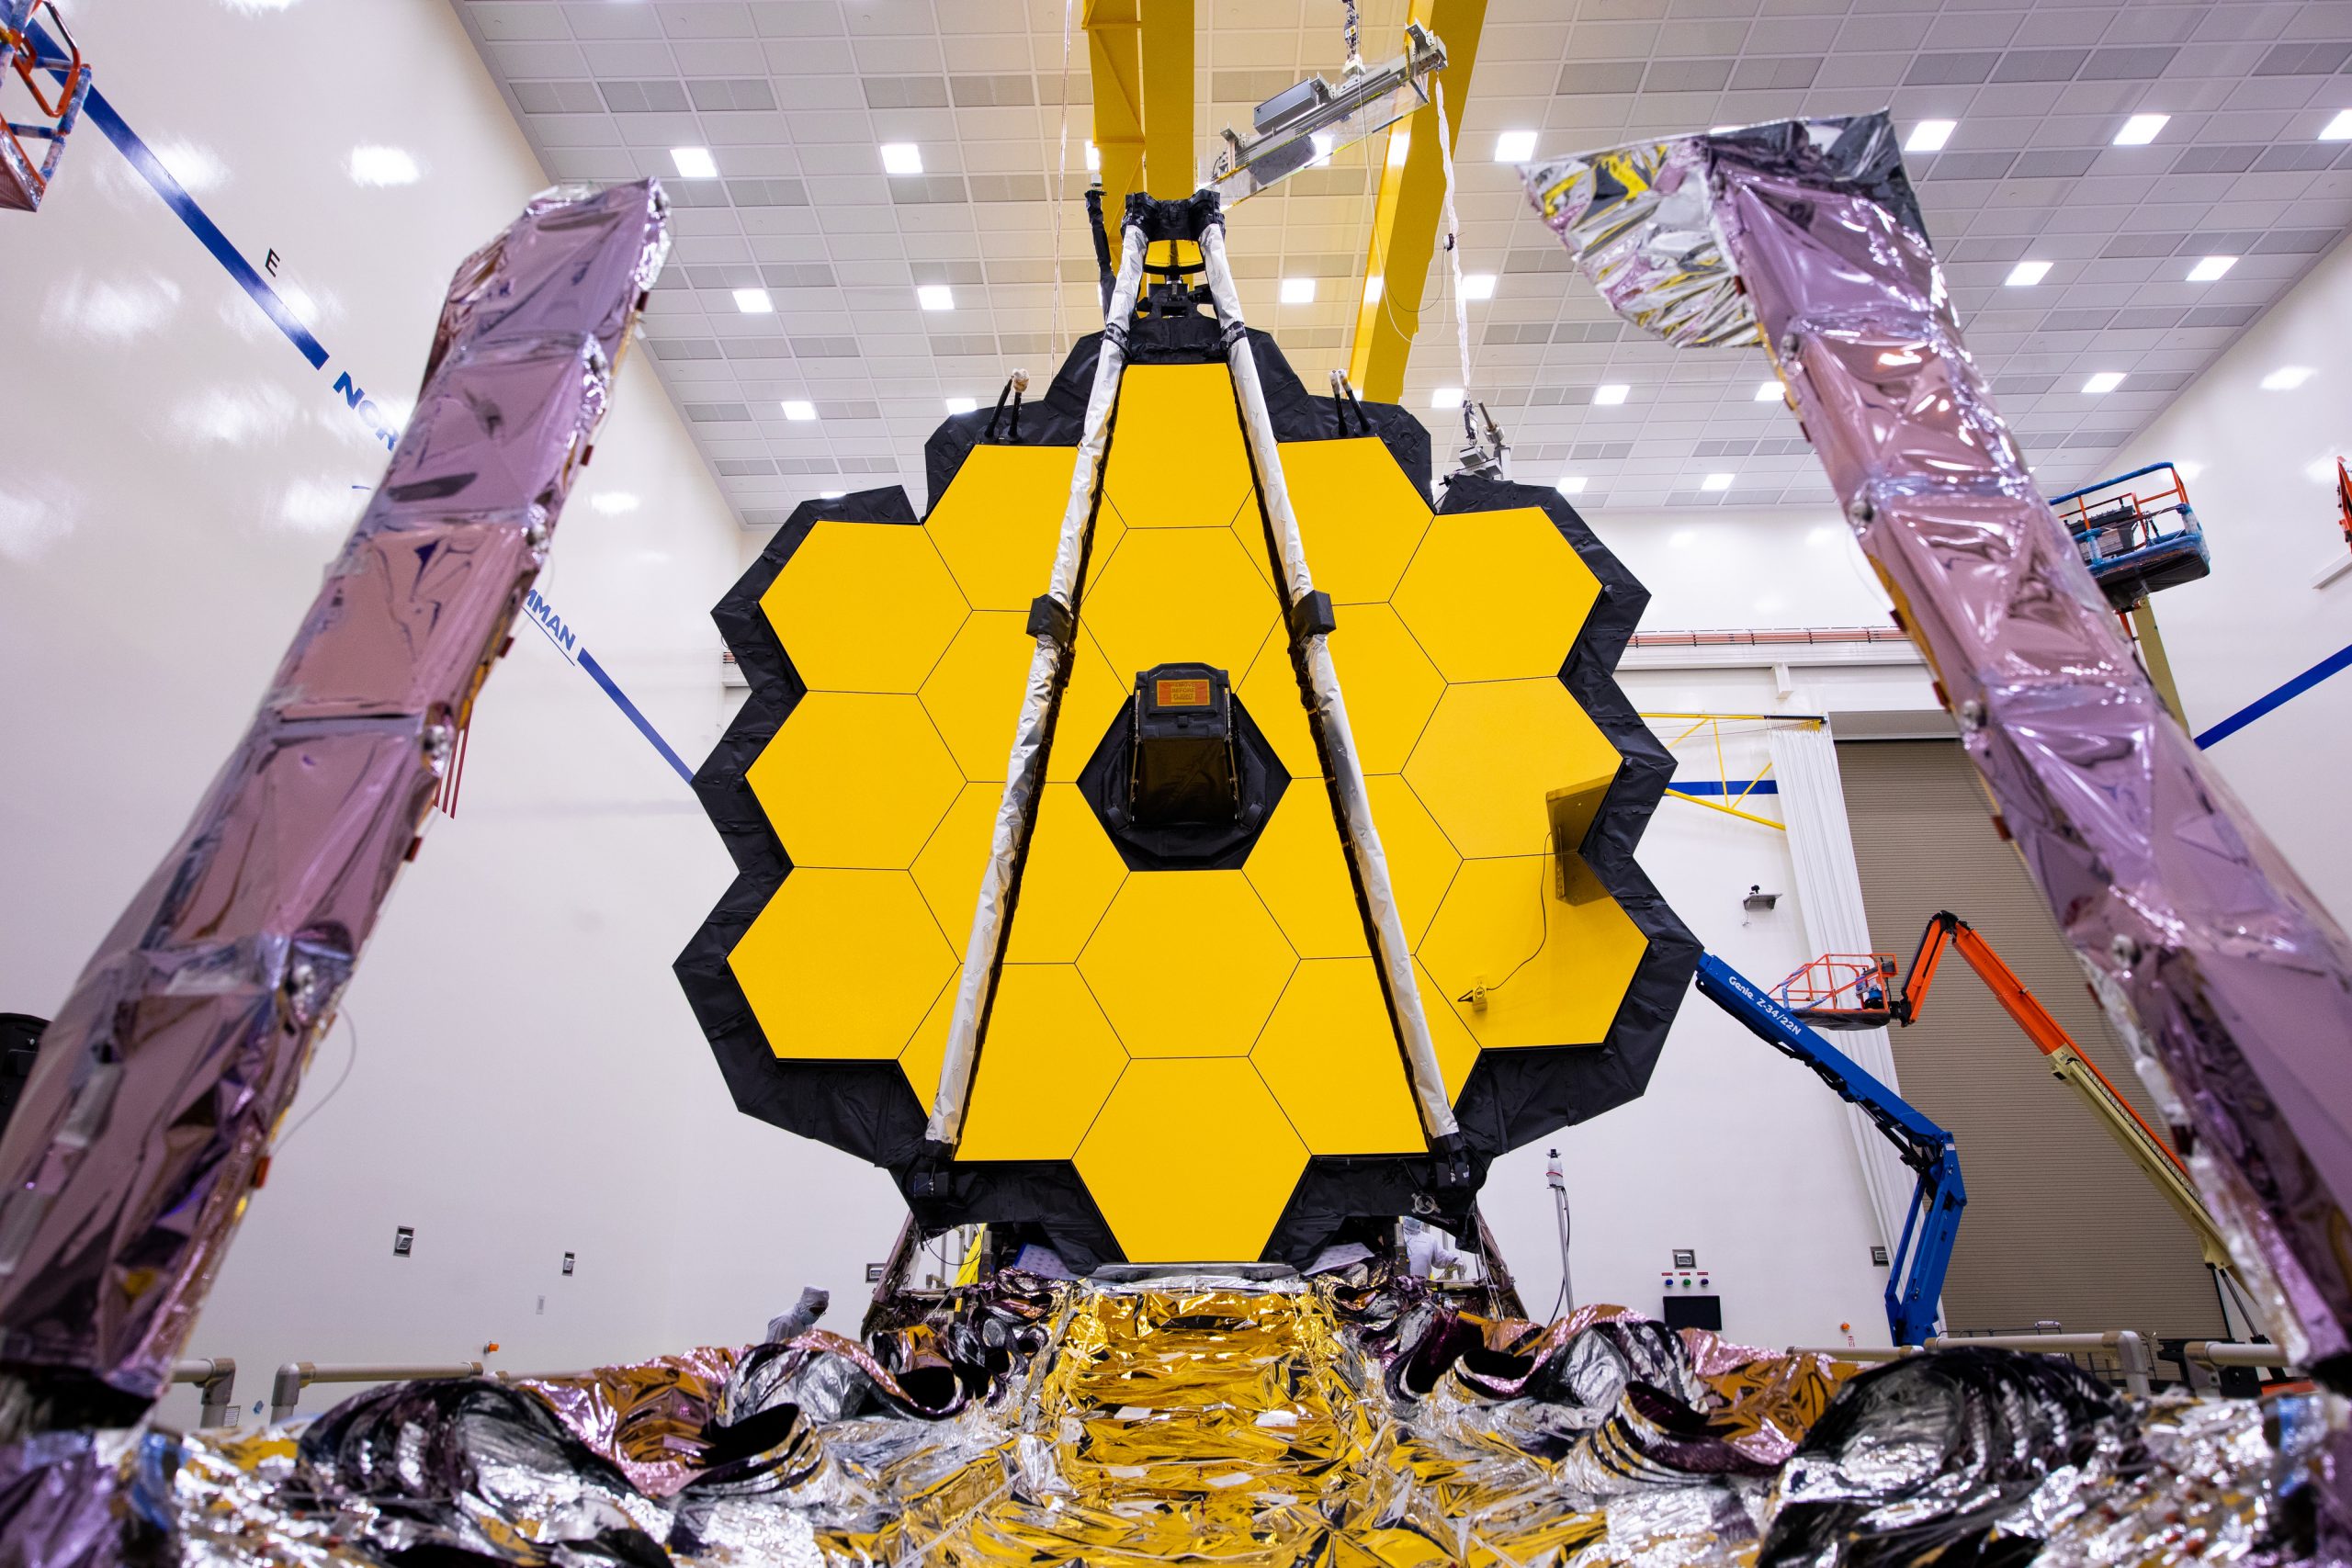 The James Webb Space Telescope displays its large and striking yellow sunshield with foldable structures surrounding it.